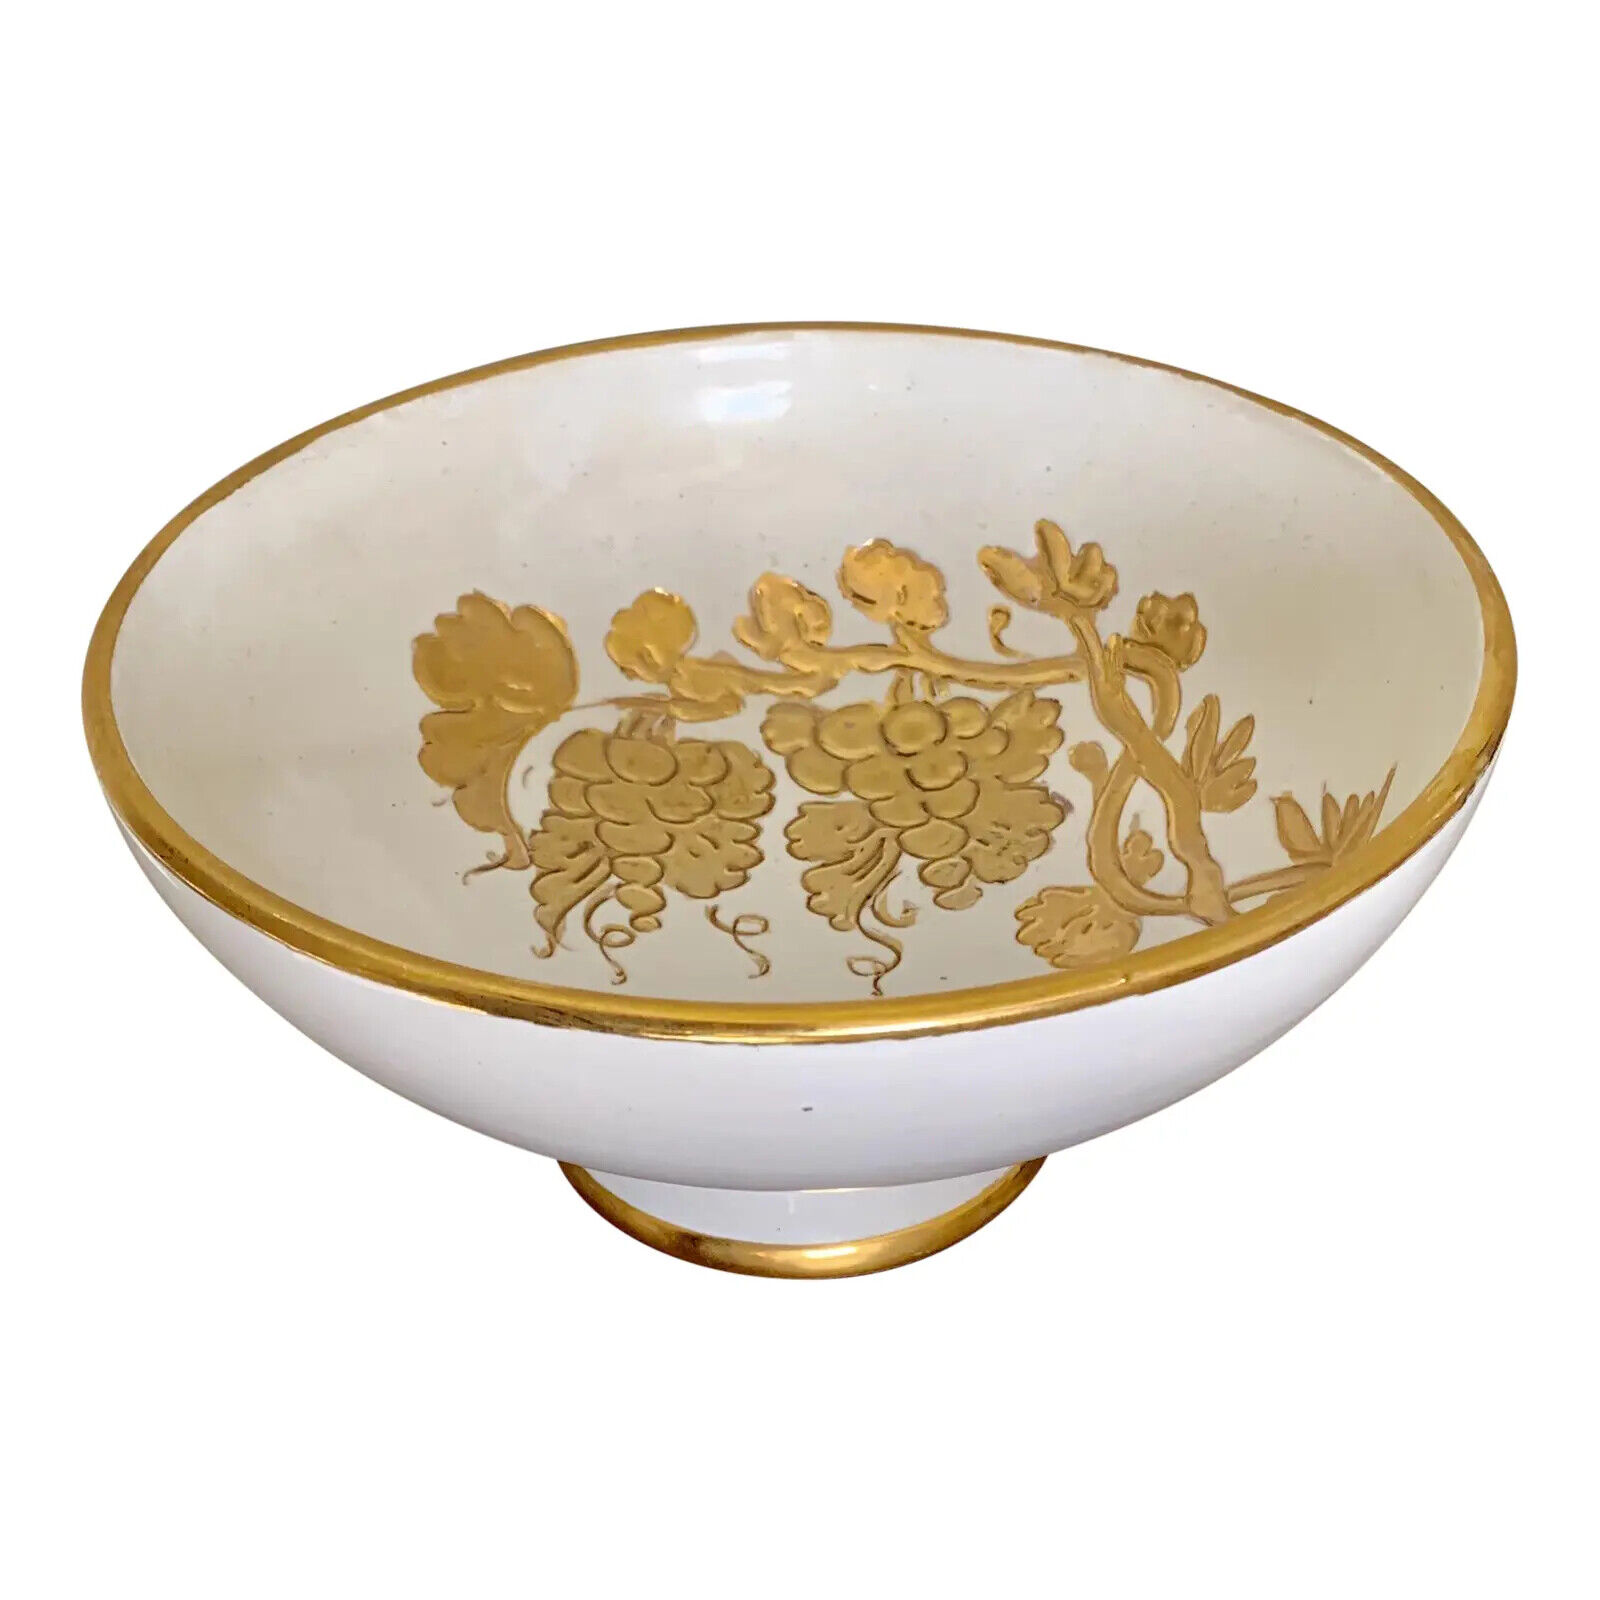 Vintage Italian Studio Footed Bowl With Hand Painted Gold Grapes Design